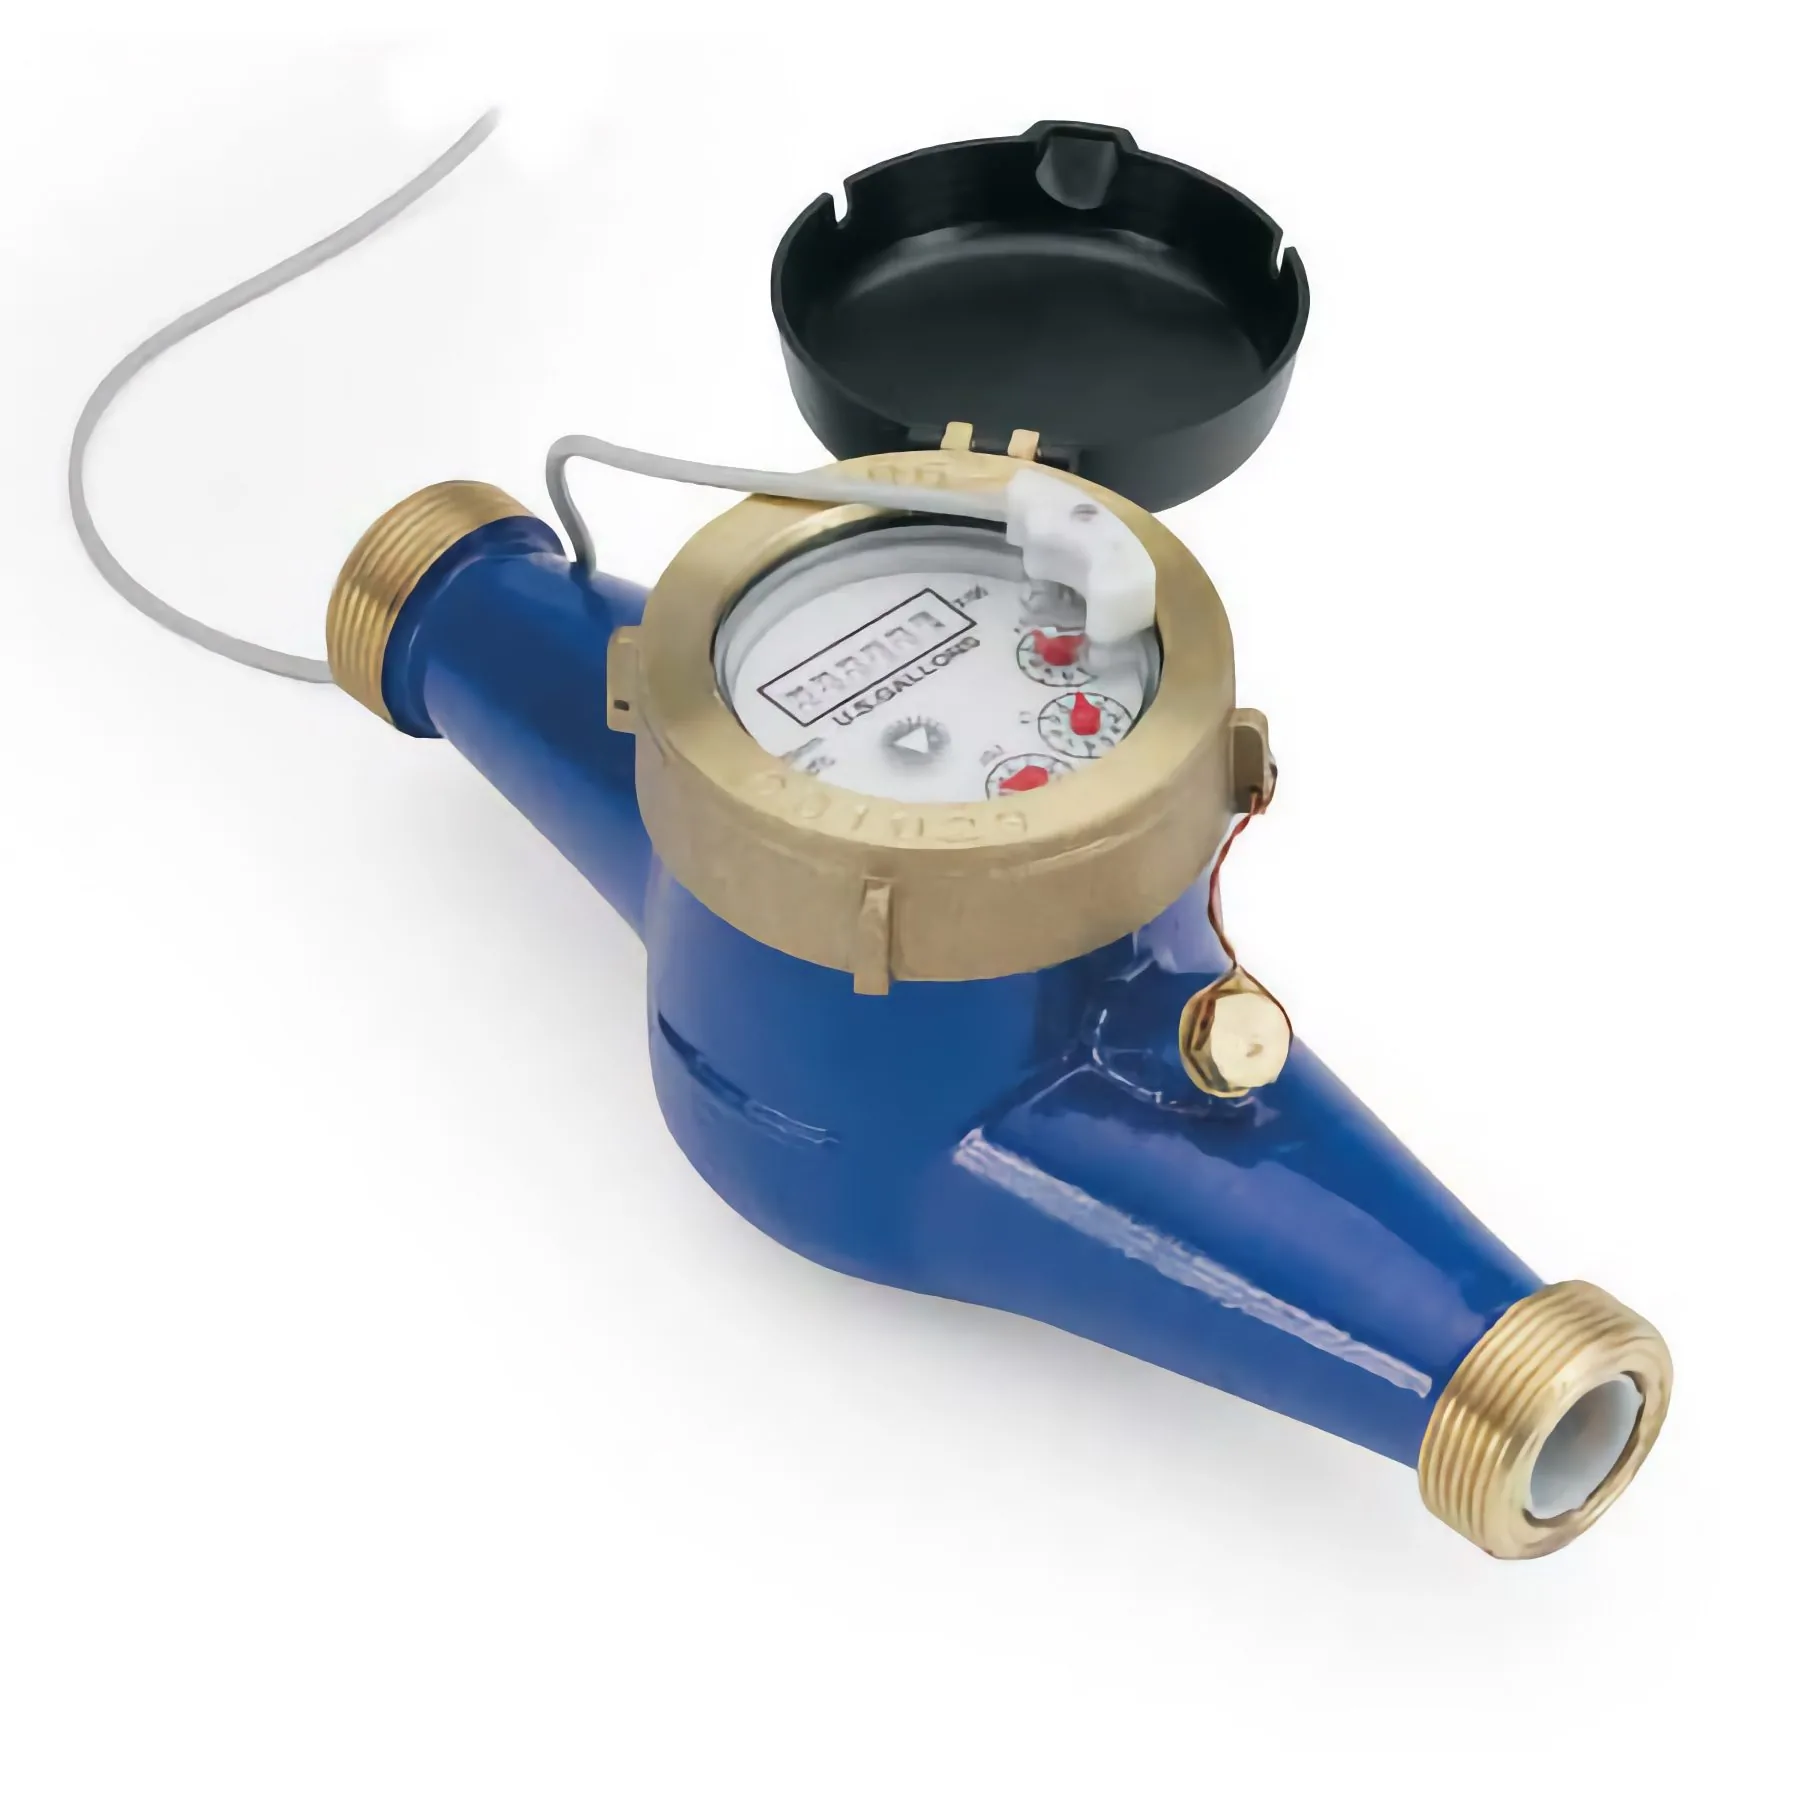 Spit B olie Adelaide Seametrics :: MJR-100-5G | Water Meter (Non-Drinking) - Pulse Output (Reed  Switch) - 1 Inch - 5 Gallons per Pulse